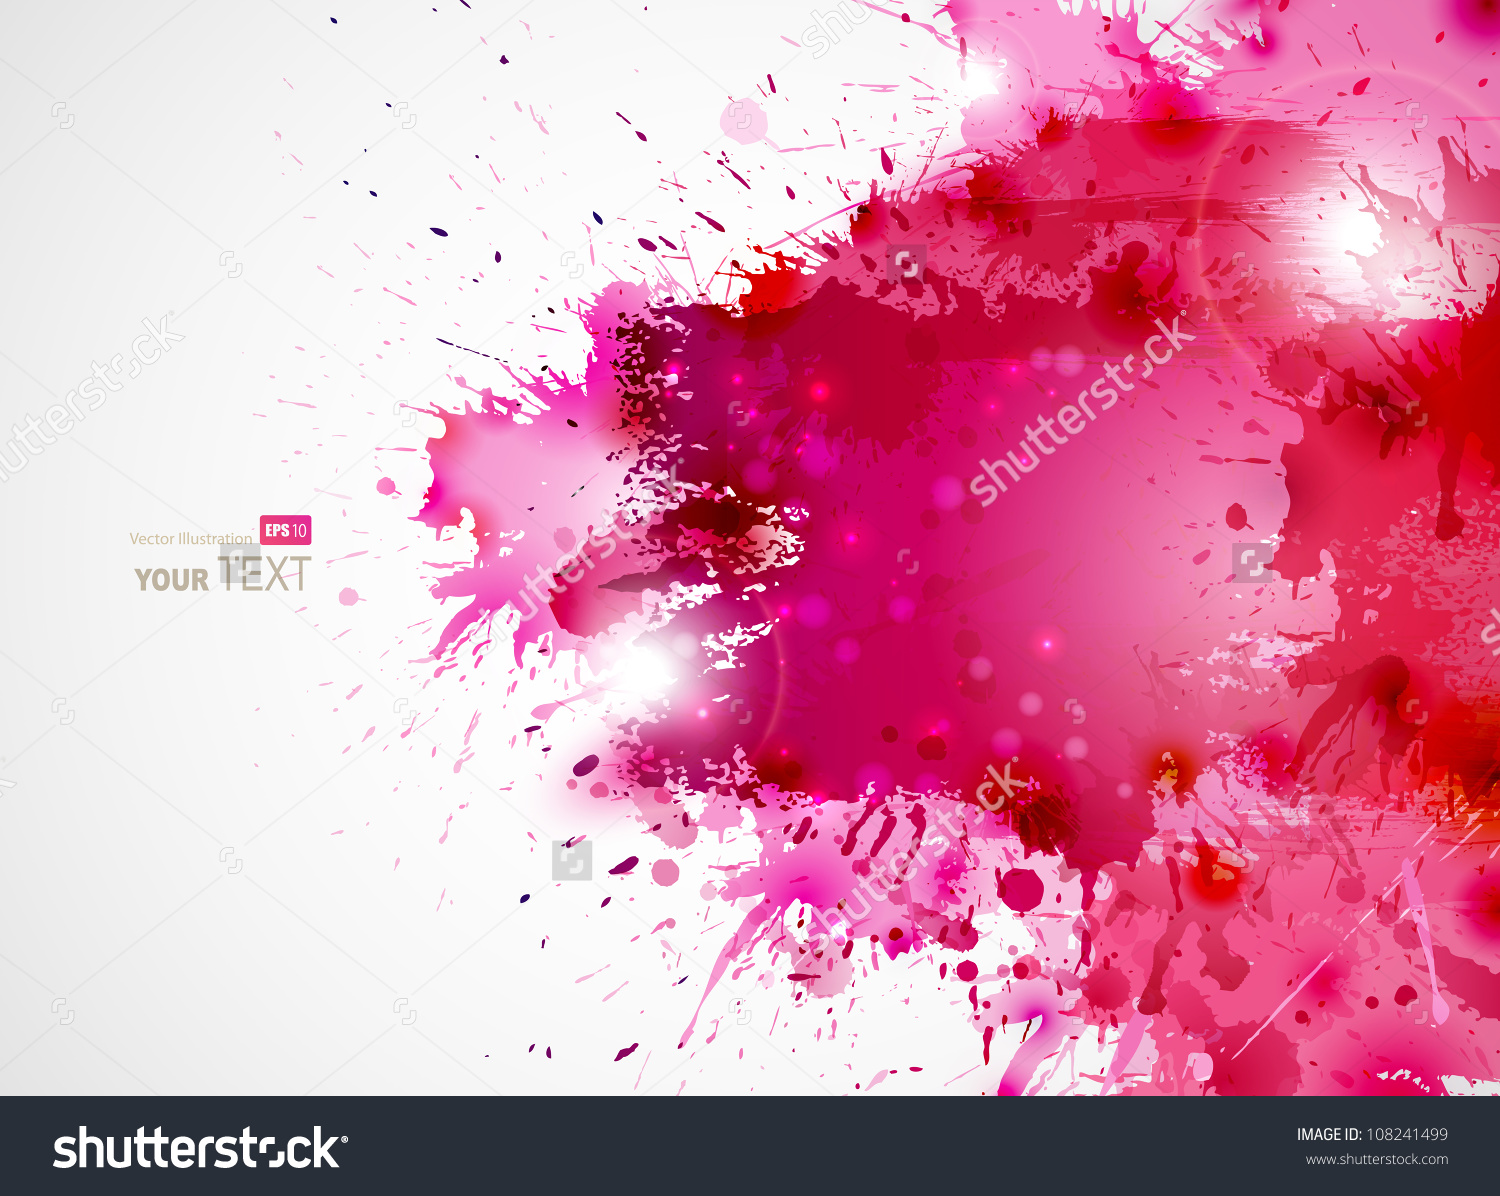 artistic background images #17